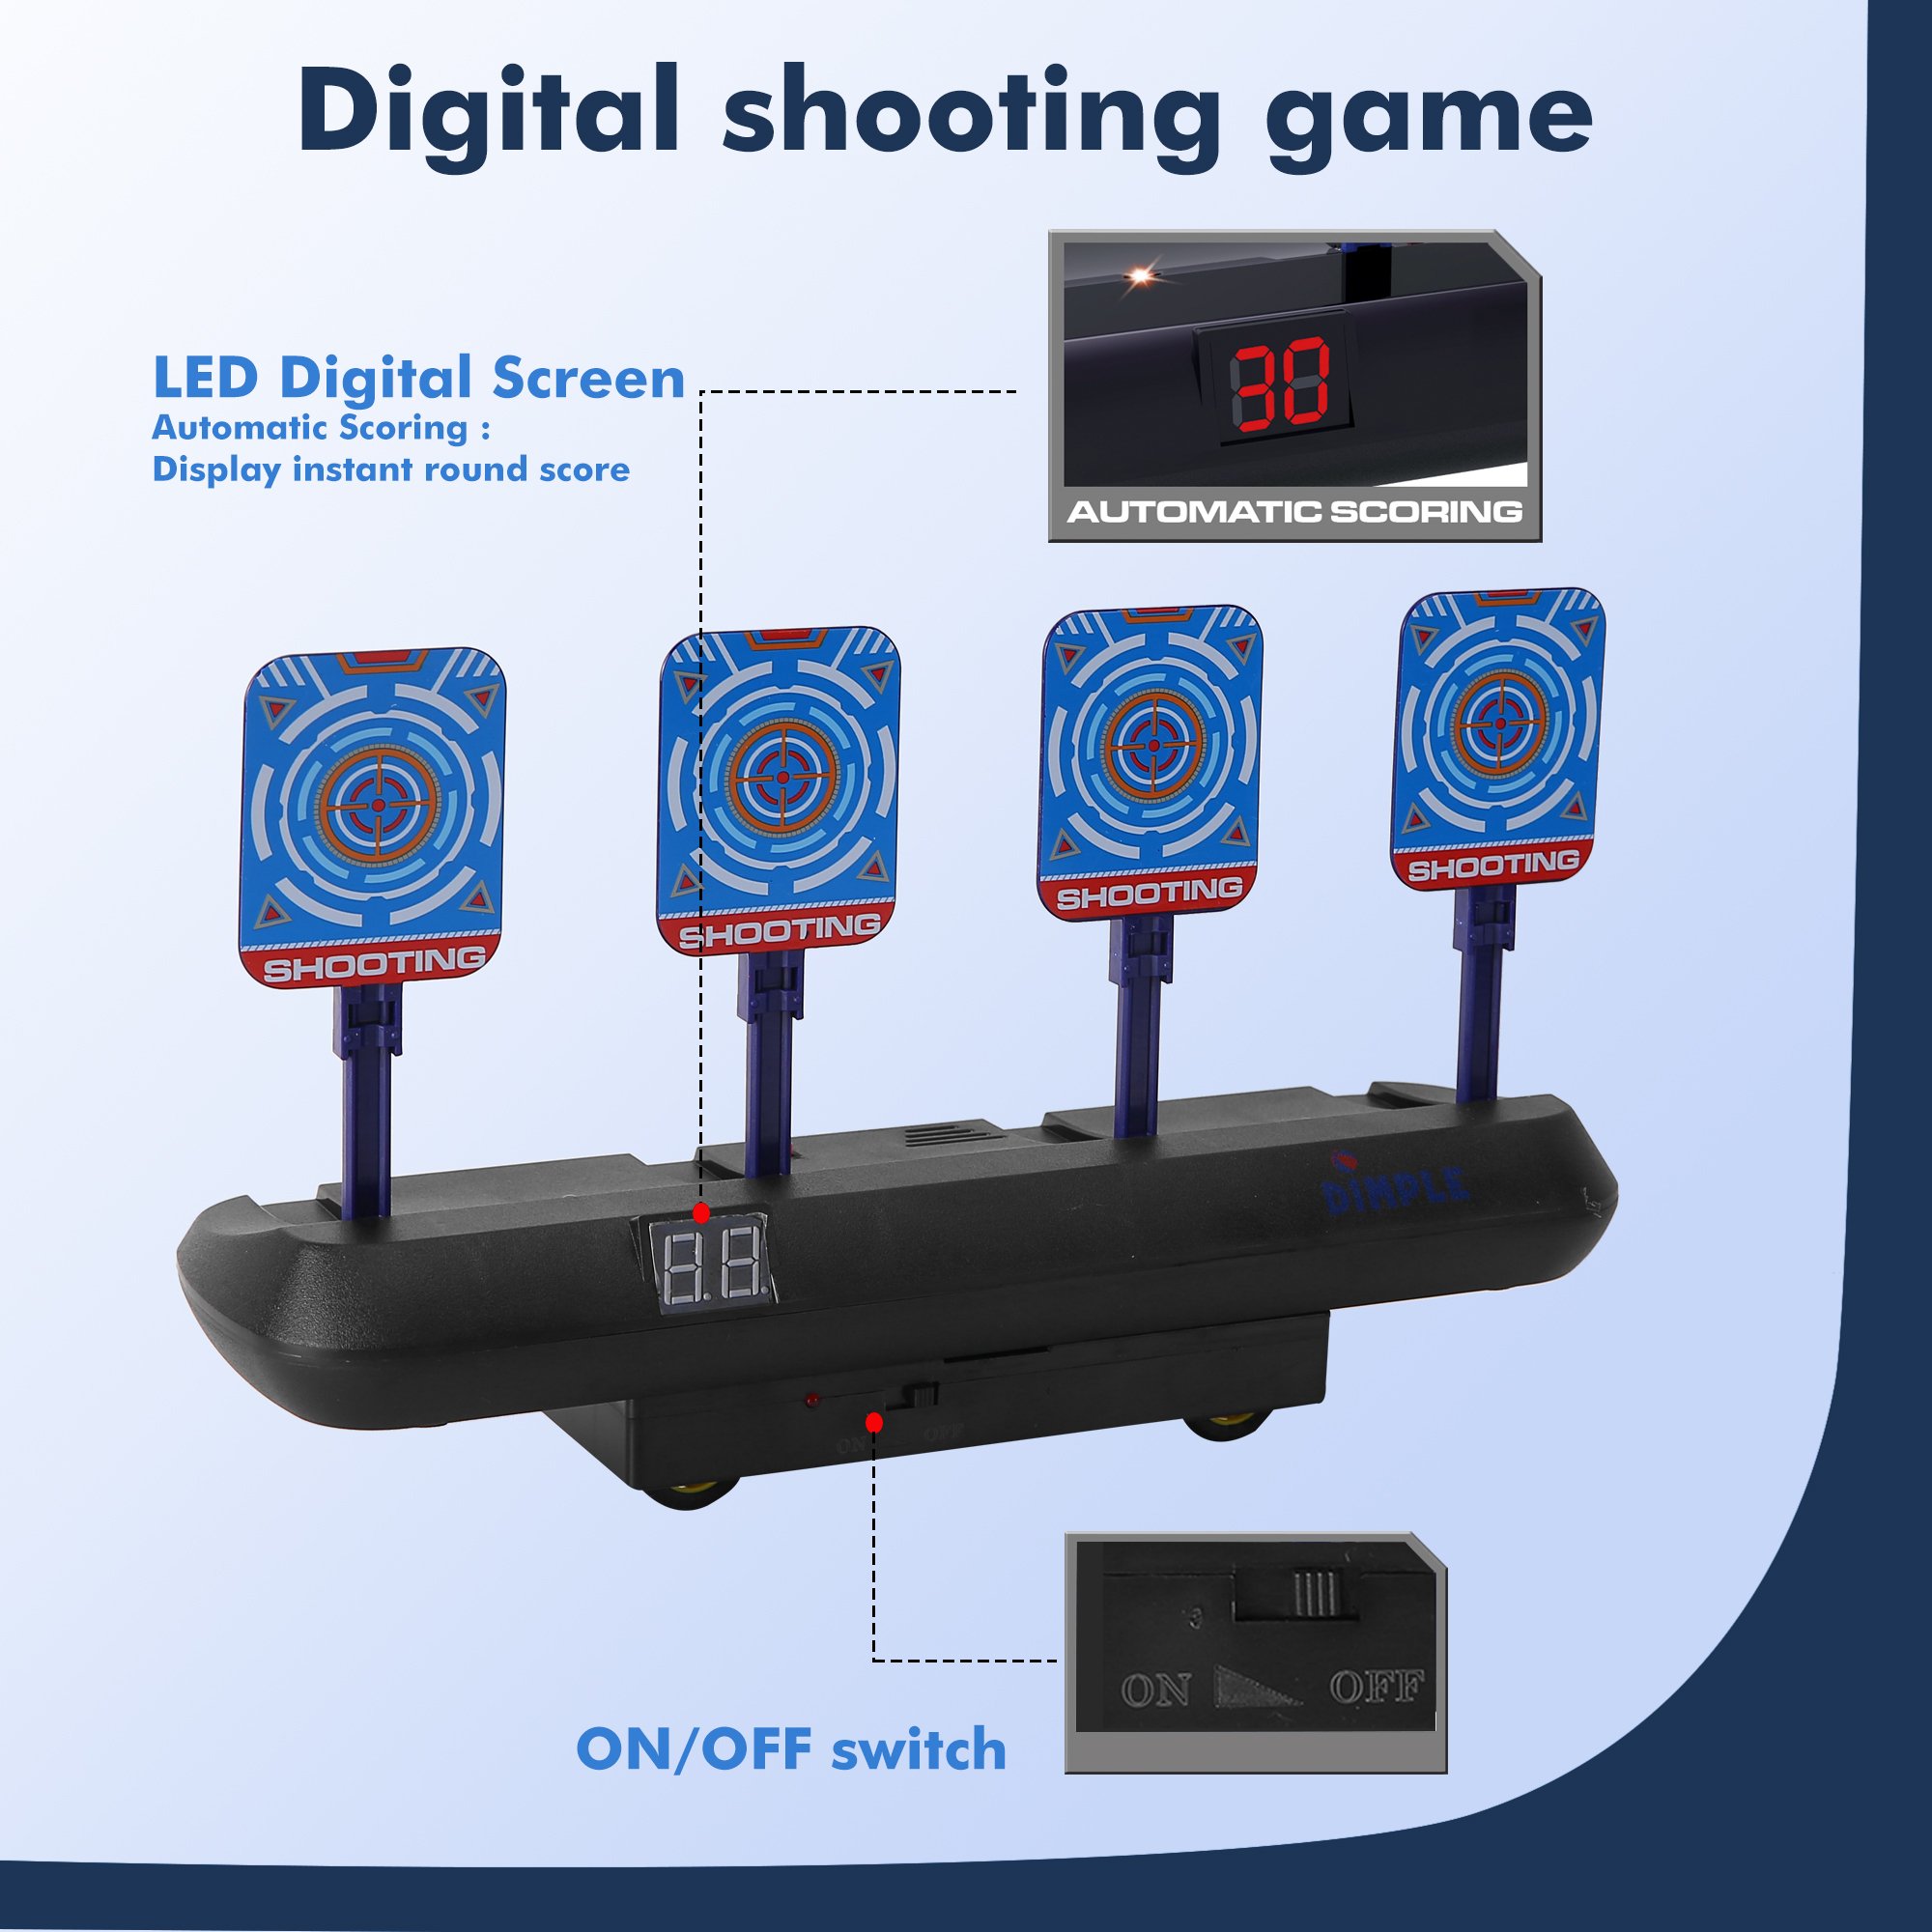 Dimple Electronic Shooting Target For Kids - Moving Digital Target Practice Game For Boys And Girls - Elite Toys Set For Children W/ Guns,